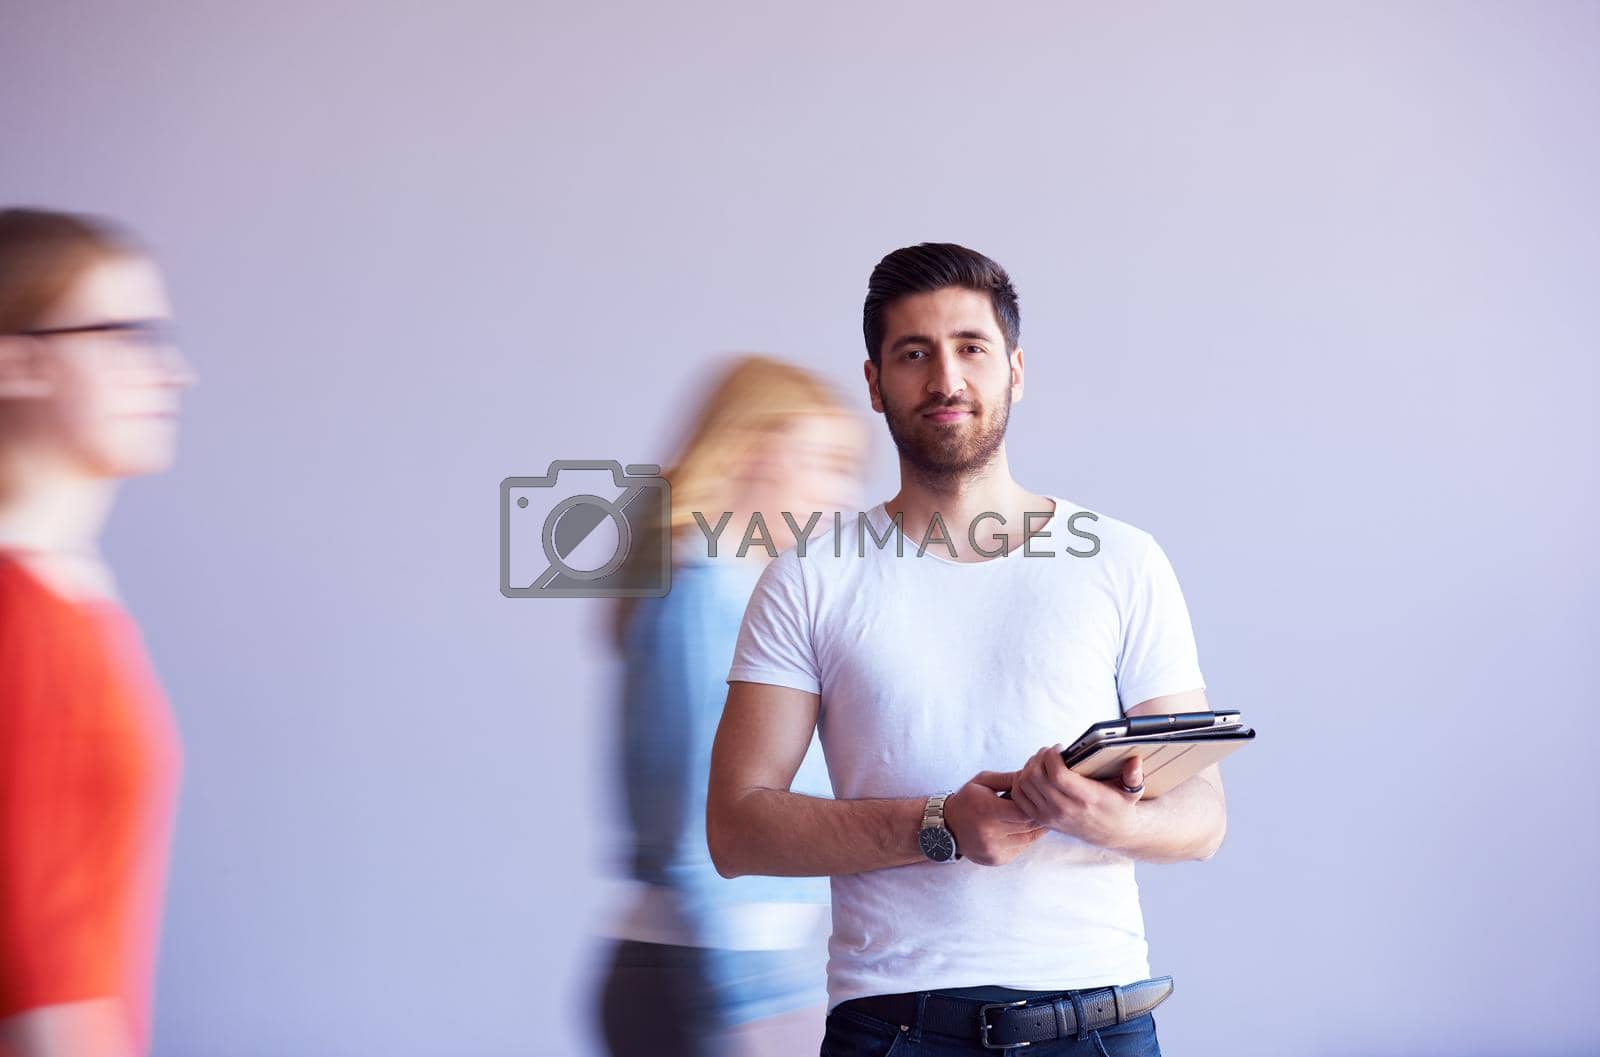 Royalty free image of student working on tablet, people group passing by by dotshock